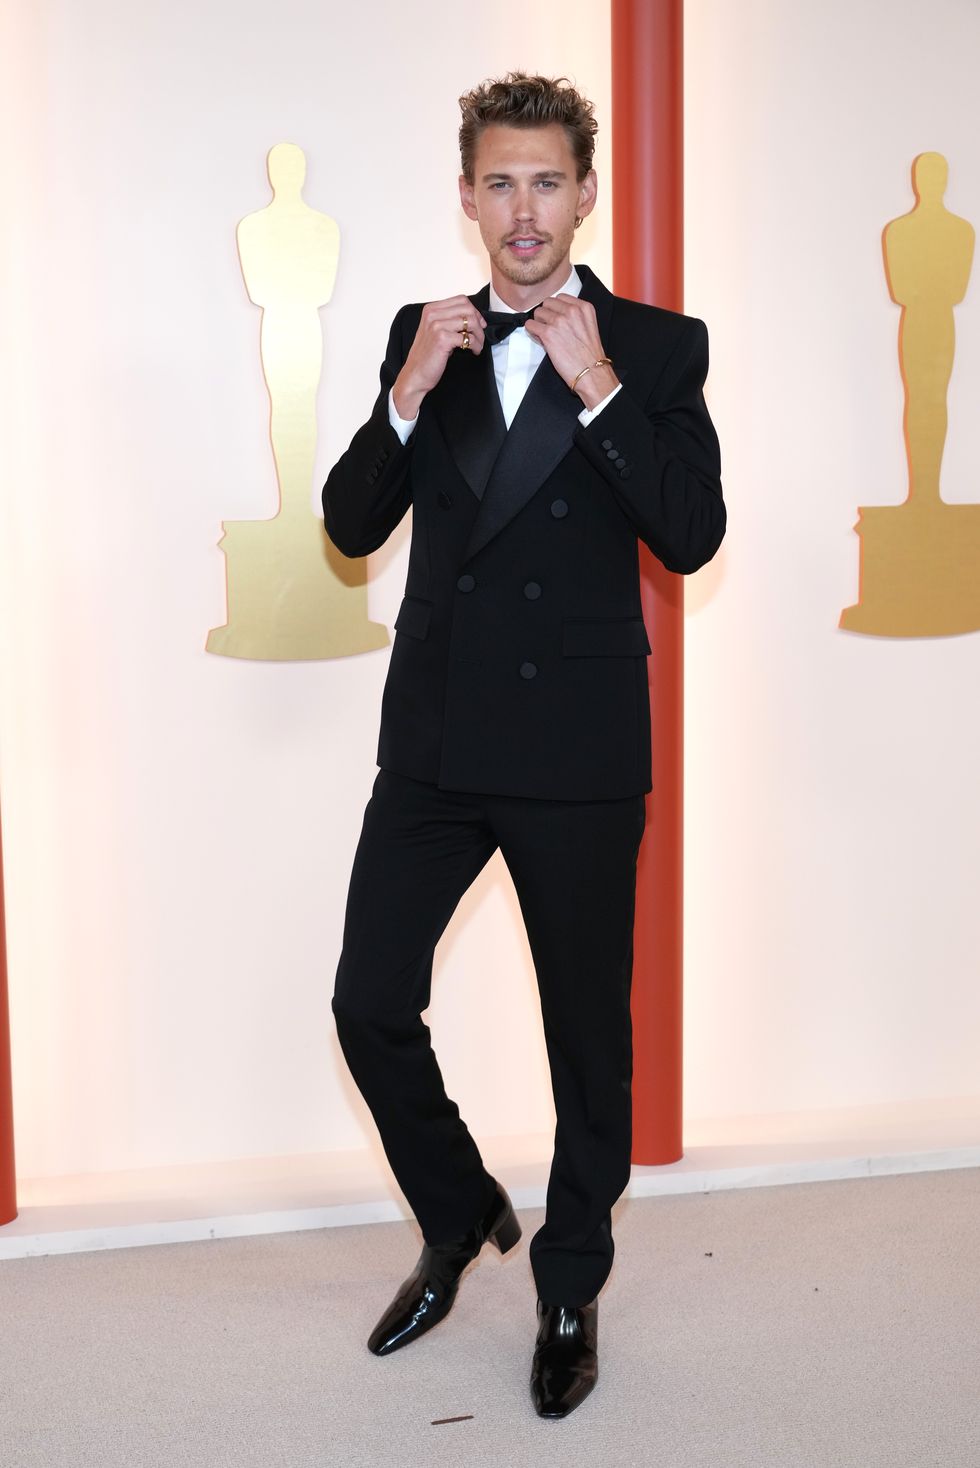 hollywood, california march 12 austin butler attends the 95th annual academy awards on march 12, 2023 in hollywood, california photo by kevin mazurgetty images